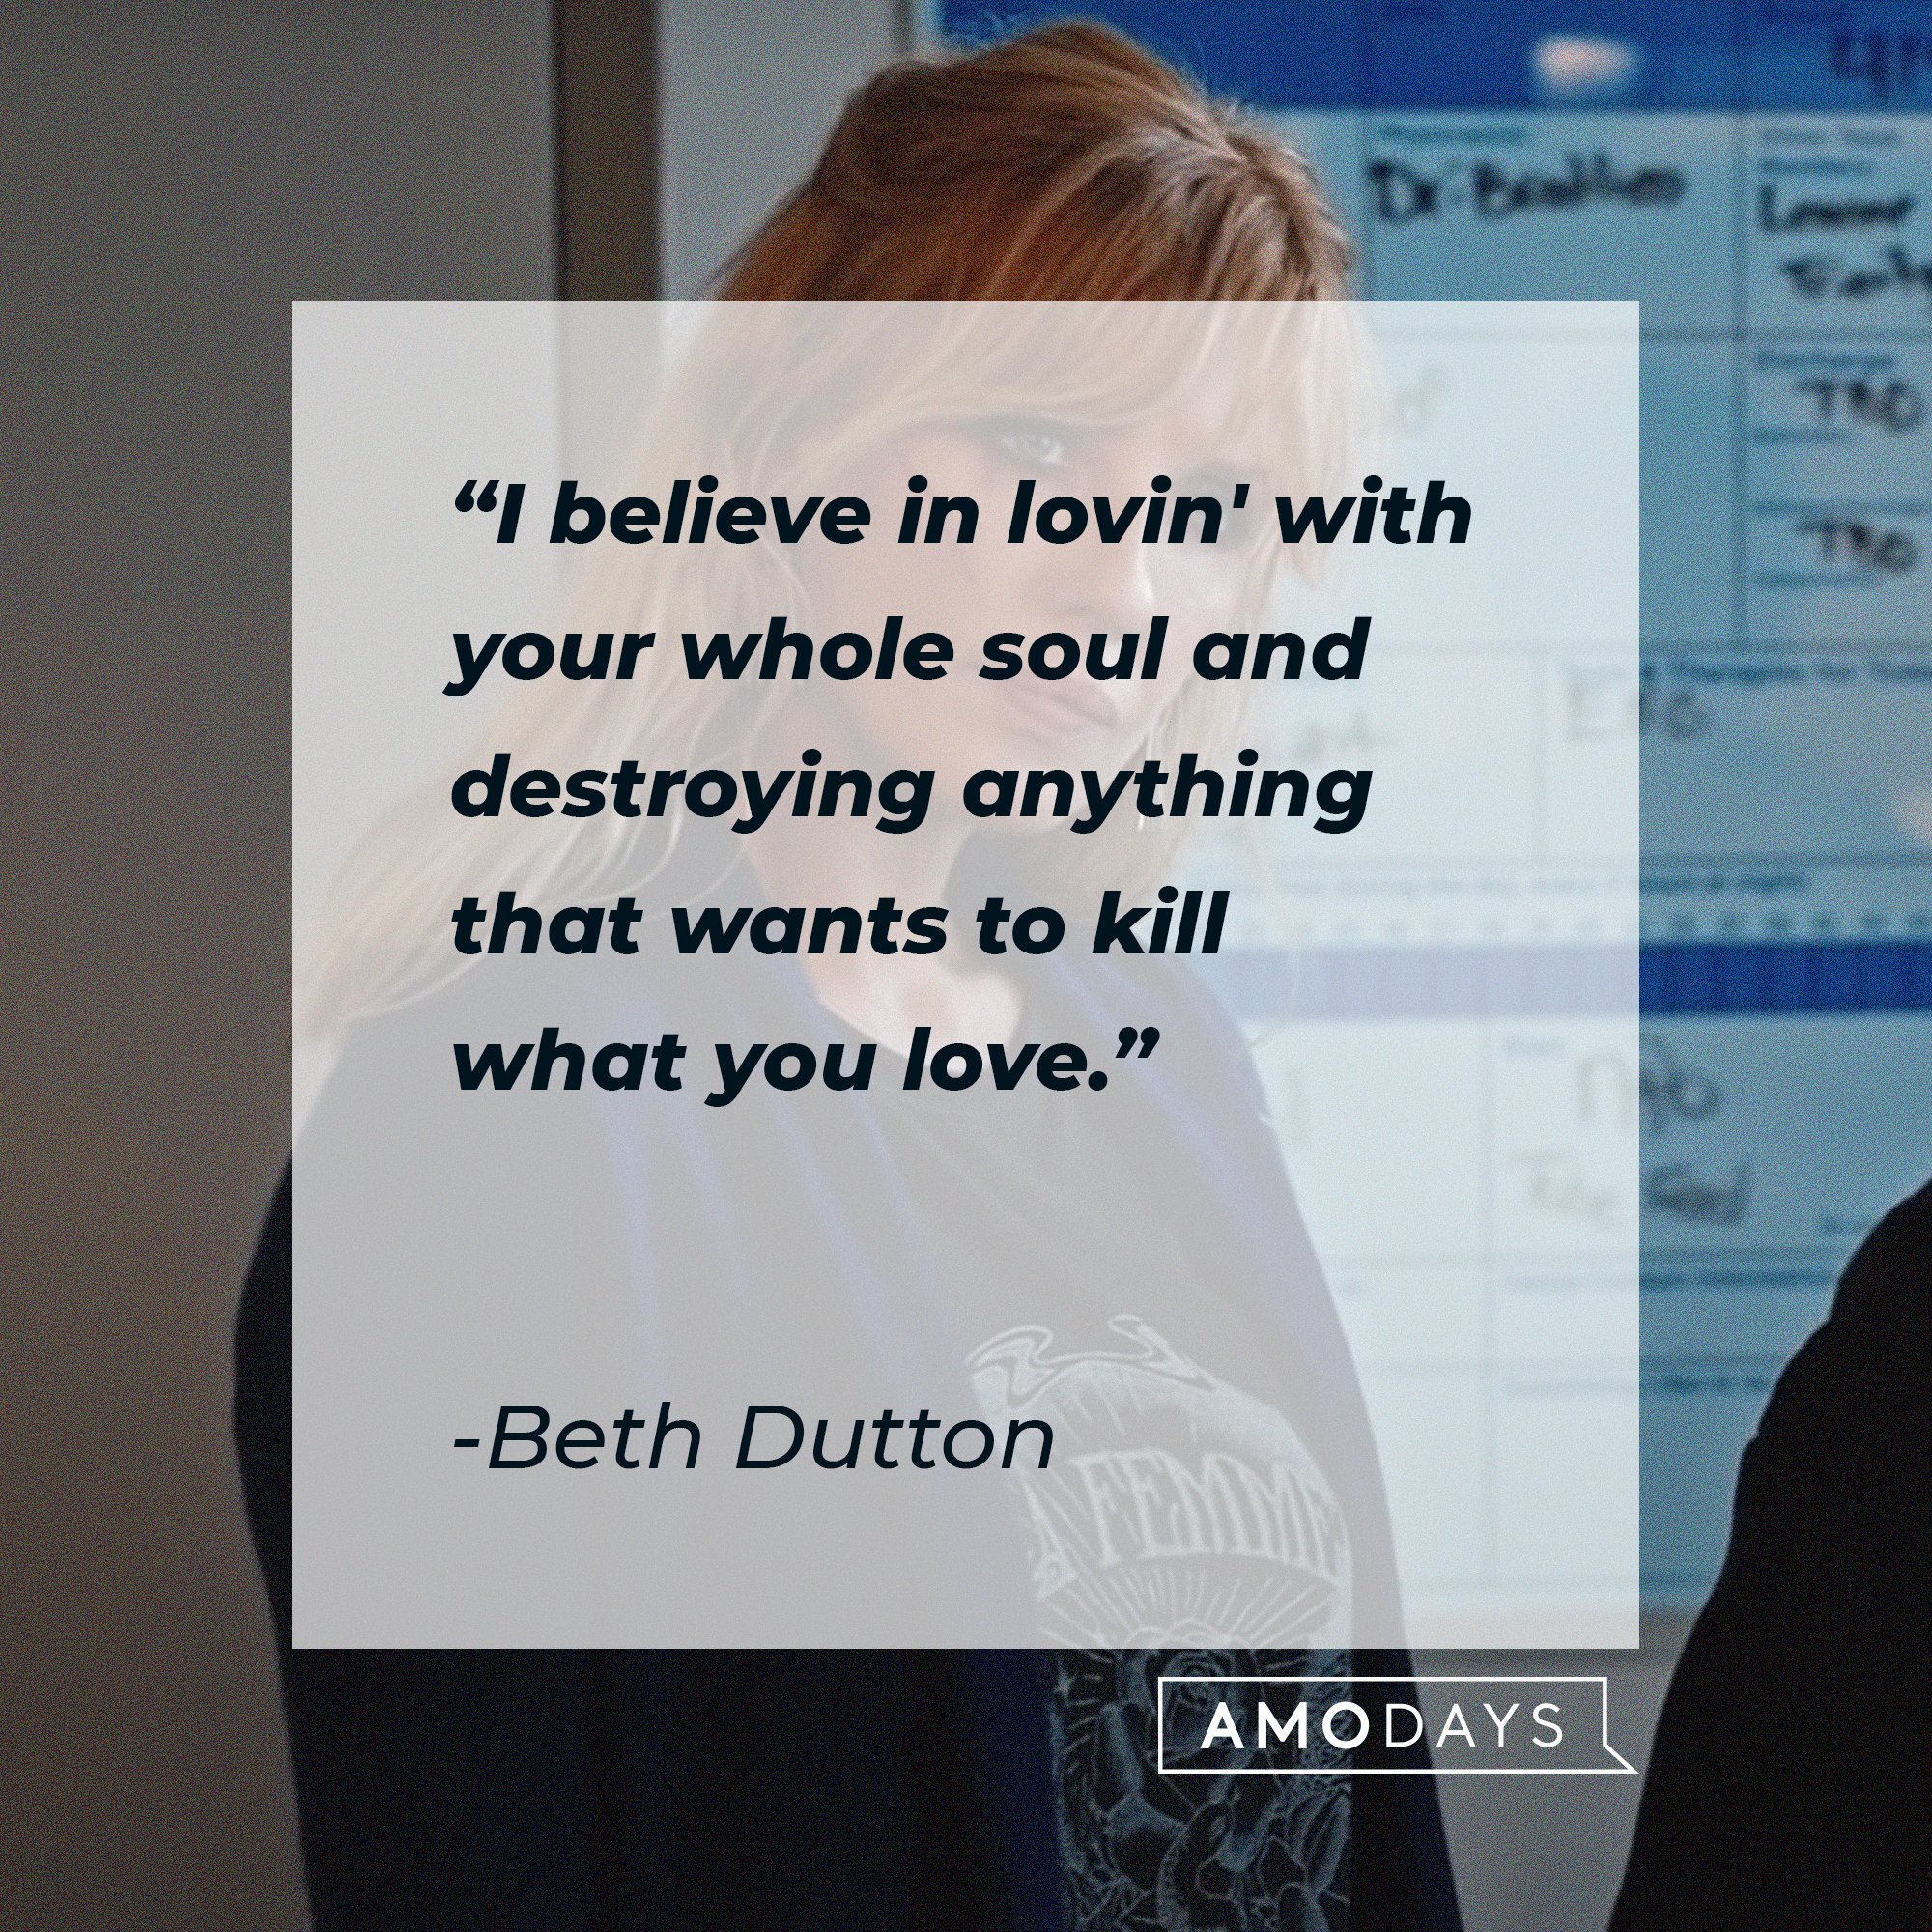  Beth Dutton's quote: "I believe in lovin' with your whole soul and destroying anything that wants to kill what you love." | Source: AmoDays